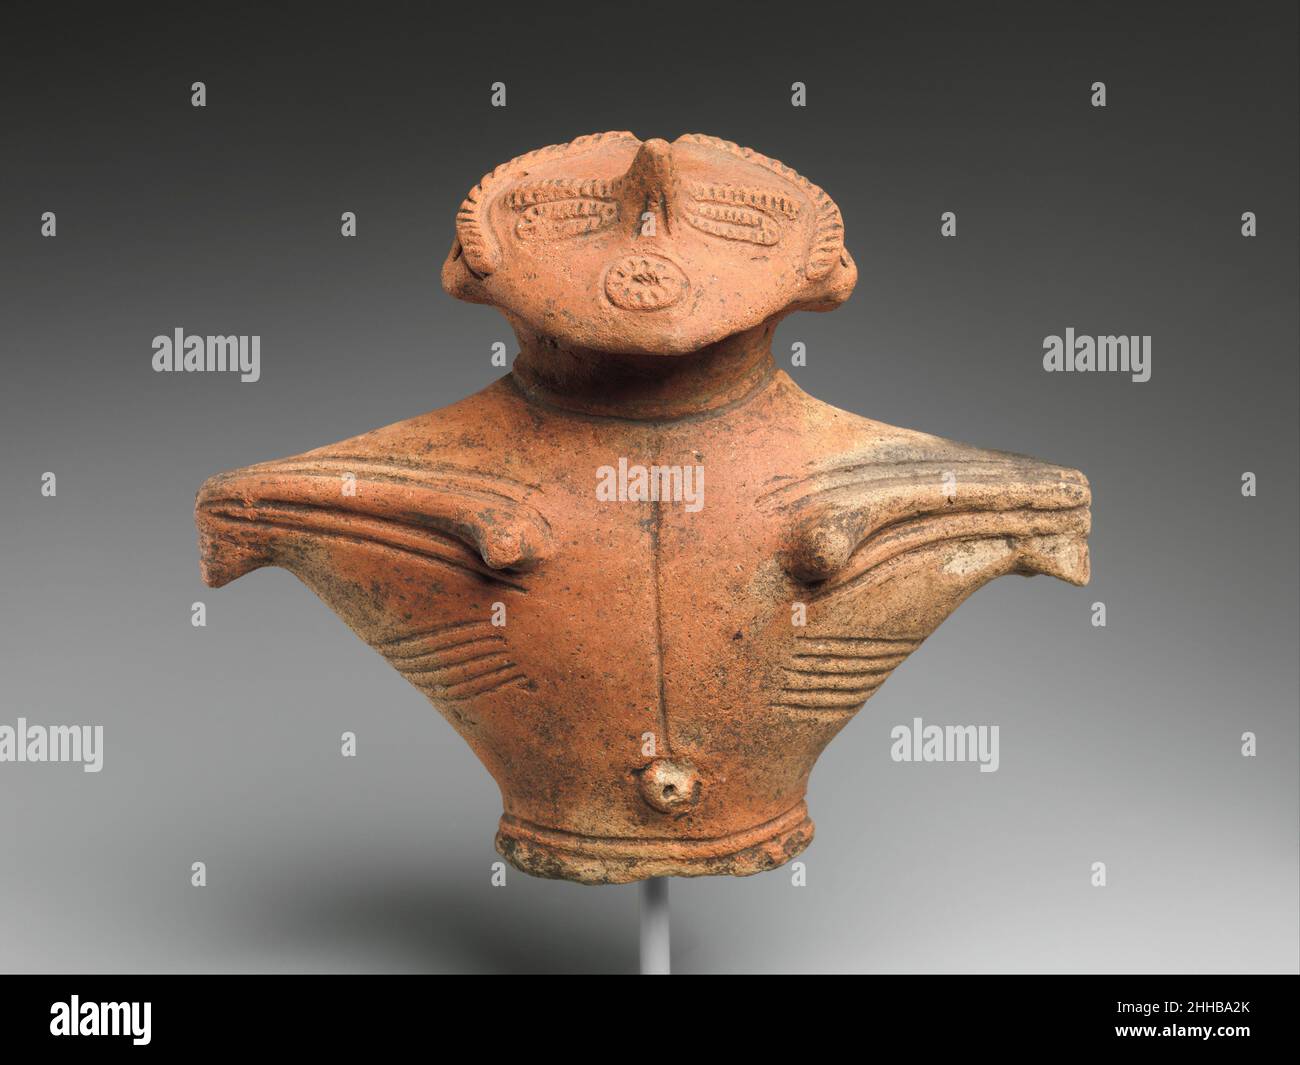 Dogū (Clay Figurine) Japan Like most figurines found at Jōmon sites, this one is broken at the waist, perhaps deliberately. Archaeologists conjecture that such figurines were used in ancient practices to ensure fertility.. Dogū (Clay Figurine)  44824 Stock Photo